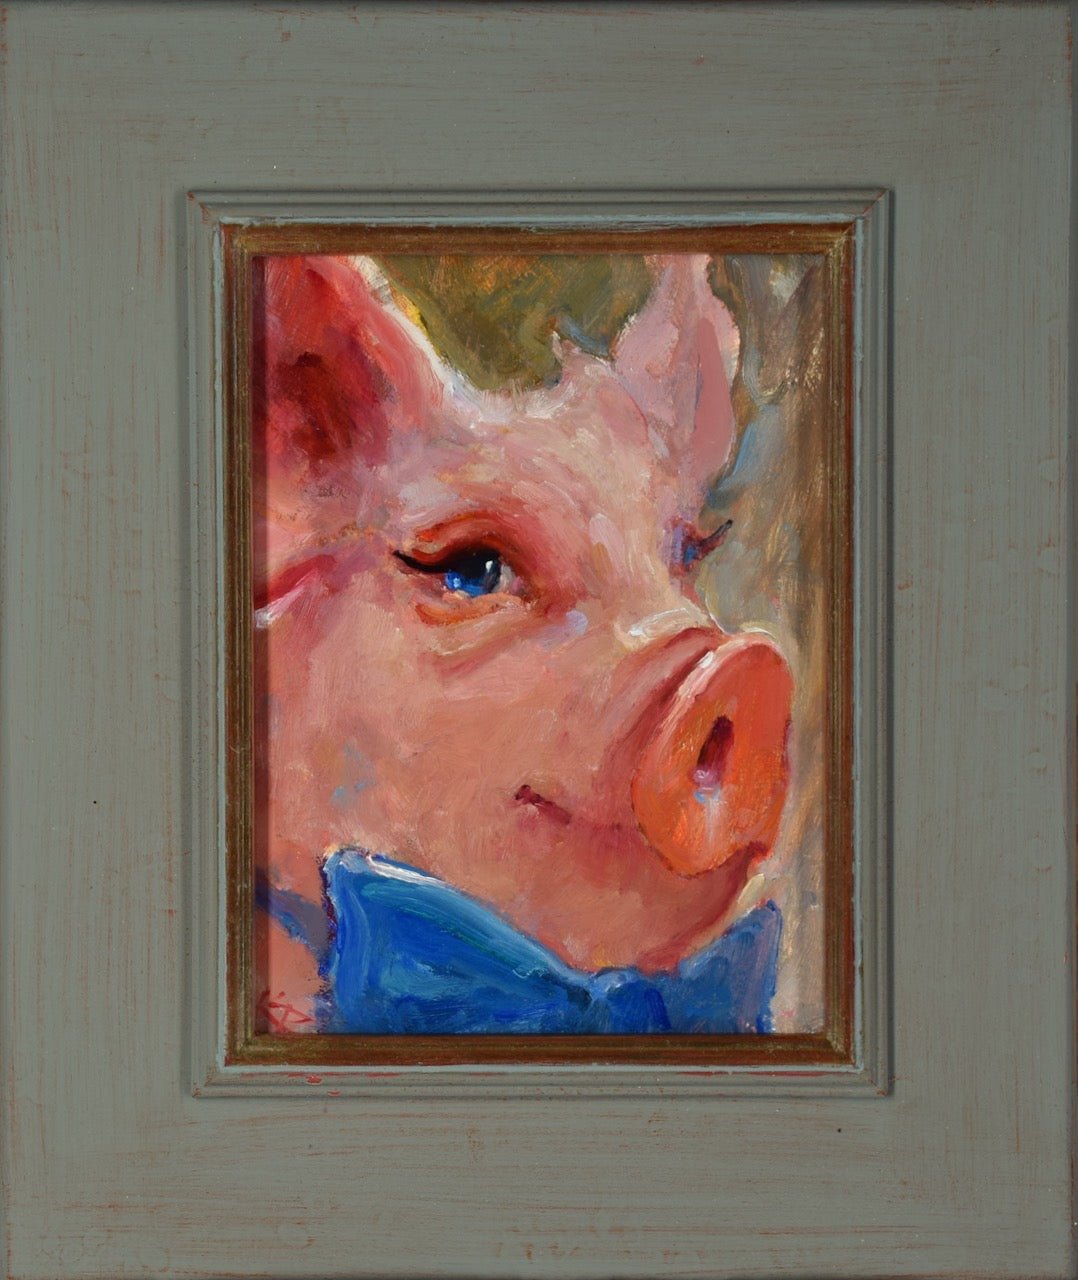 Ol Blue Eyes by Kyle Paliotto at LePrince Galleries